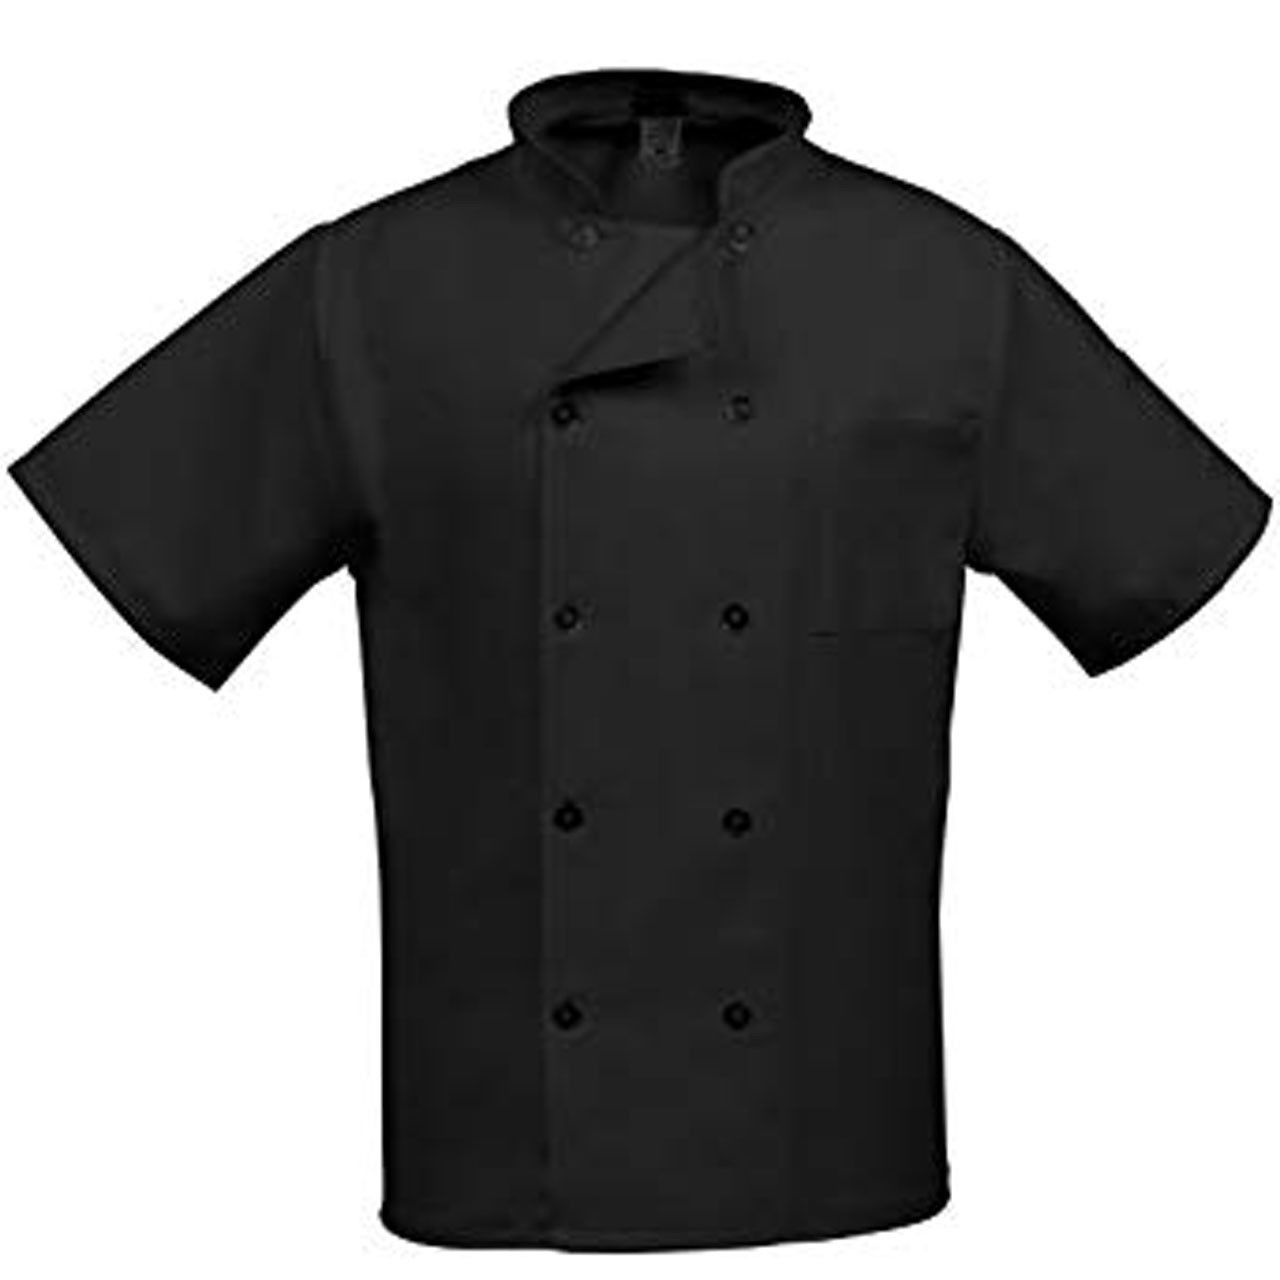 What are the key features of this chef coat?